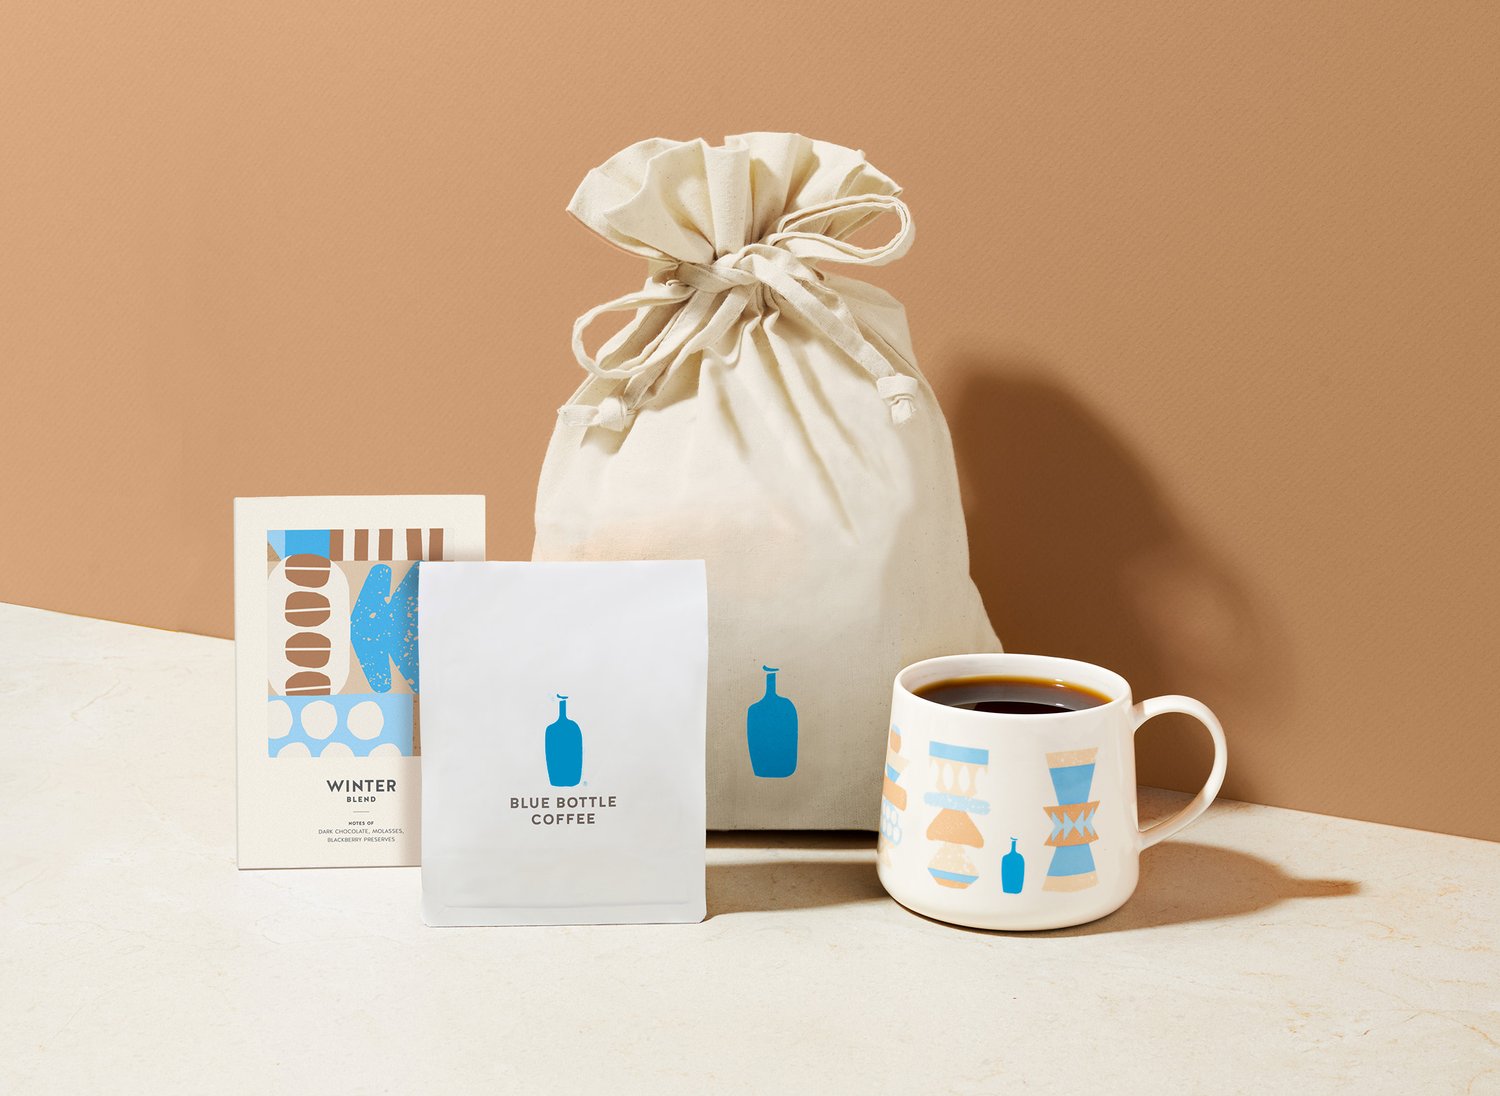 https://images.squarespace-cdn.com/content/v1/59c01dcce9bfdf14c20ff58e/1638122344311-OHFAIGK423HEGNS3RC5L/CROP+Holiday+Mug+and+Winter+Coffee_Blend.jpg?format=1500w